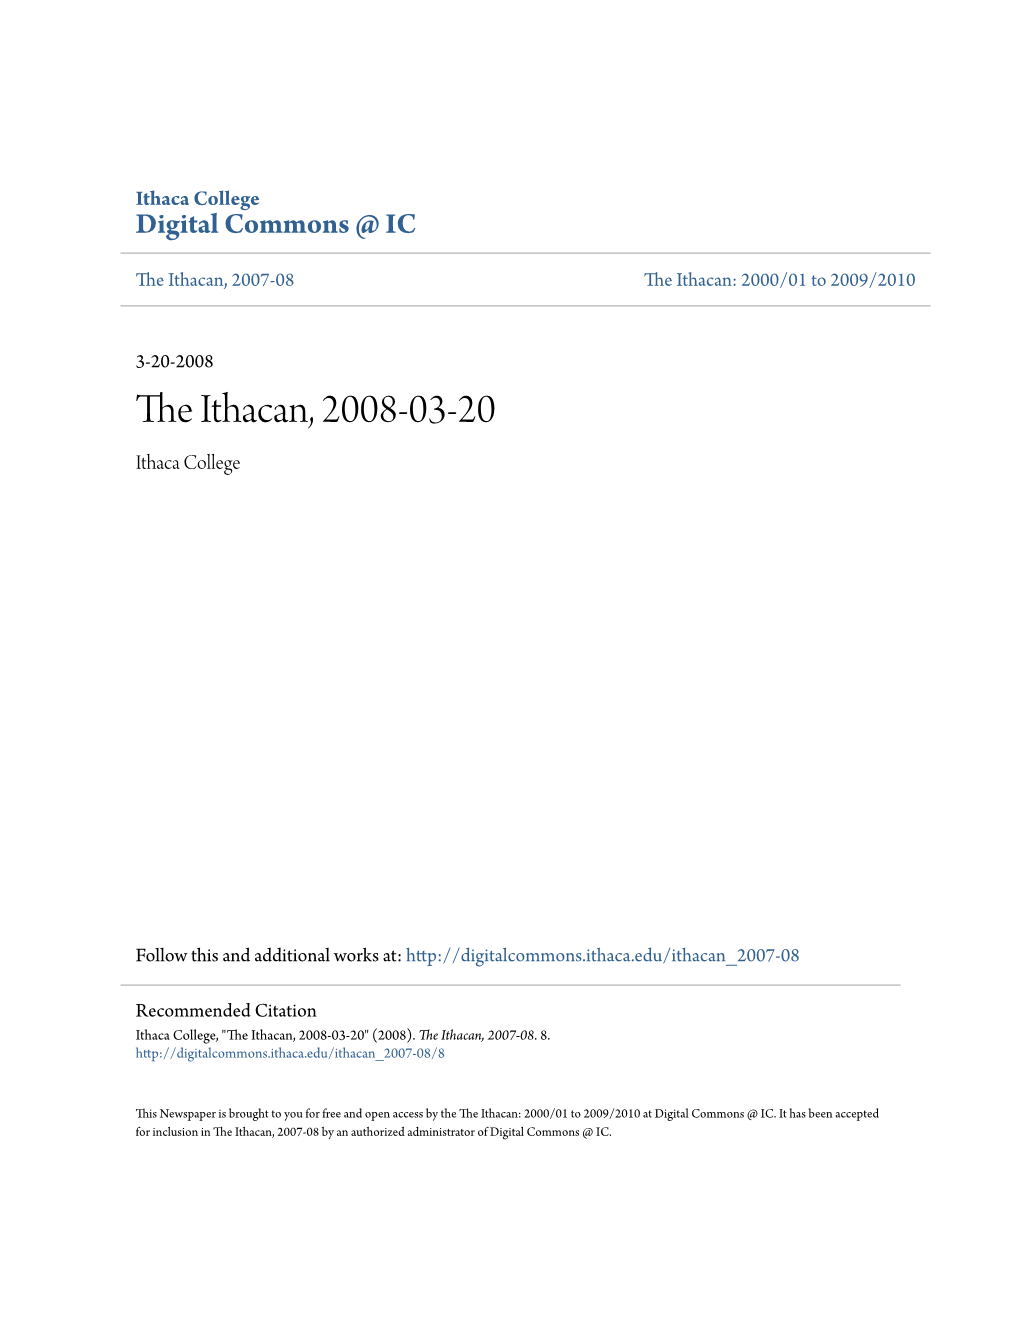 The Ithacan, 2008-03-20